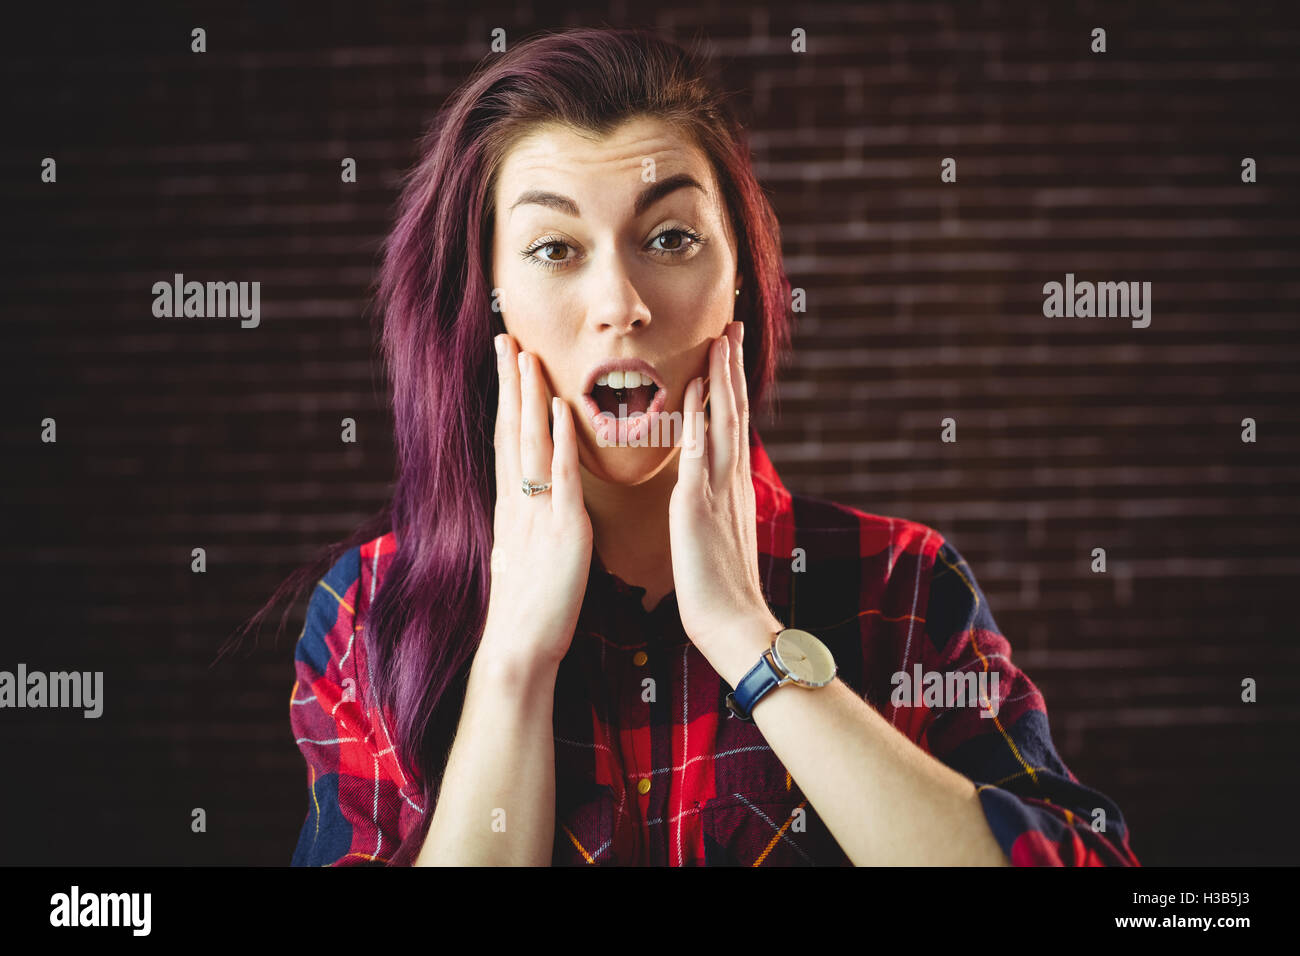 Young woman making a surprised facial expression Stock Photo